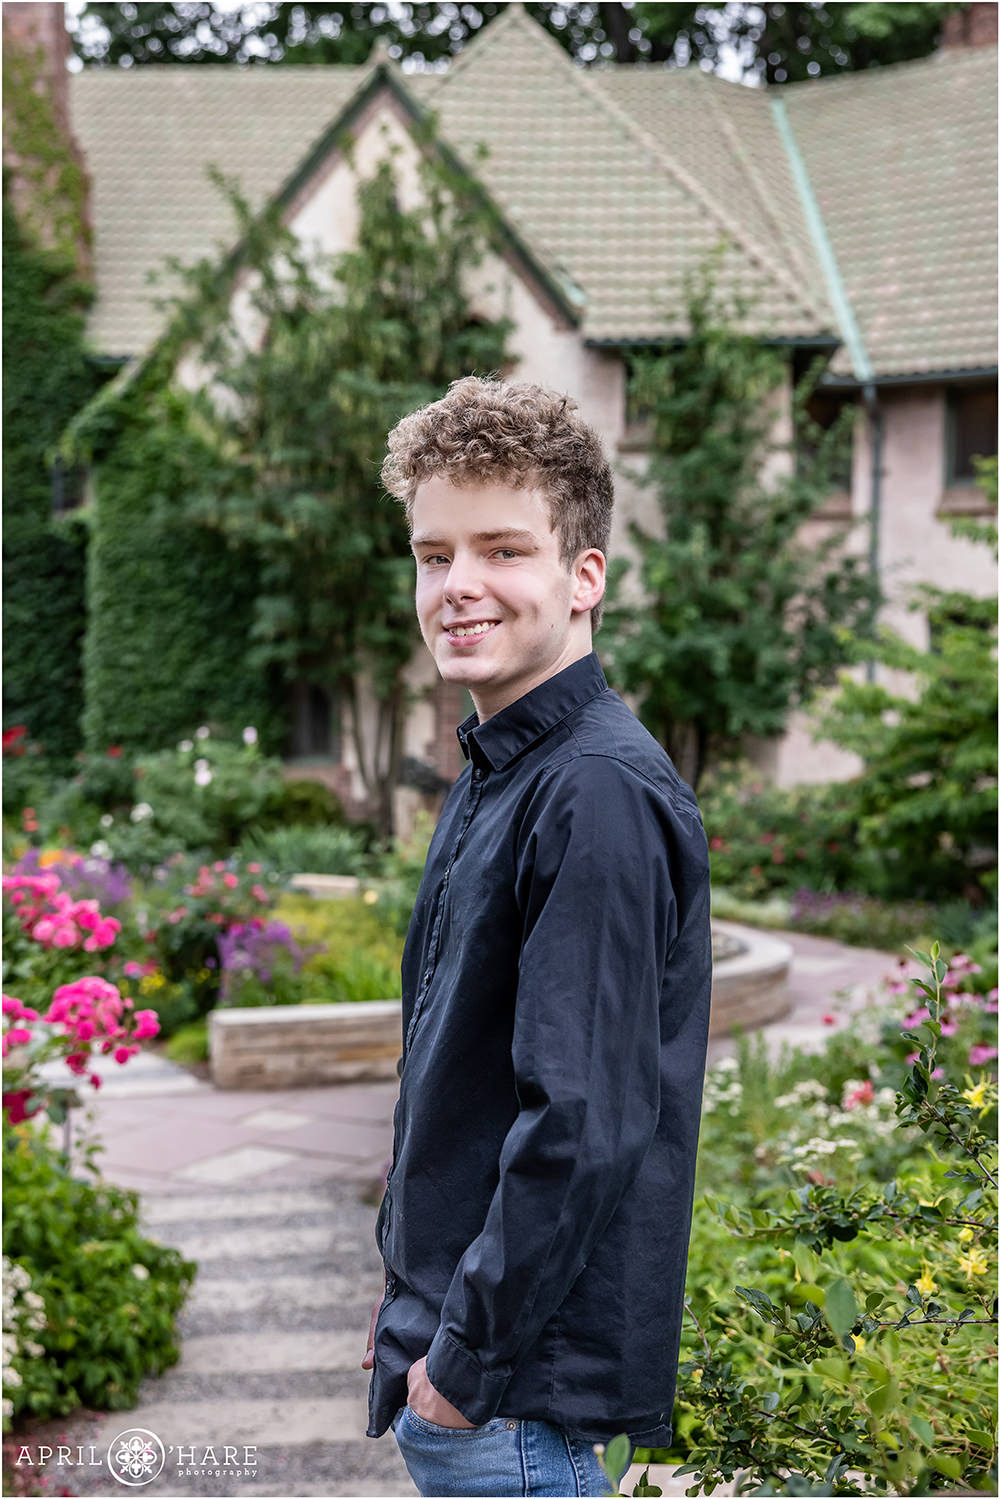 Handsome young senior wearing a black button down long sleeve shirt in a colorful garden setting in Denver